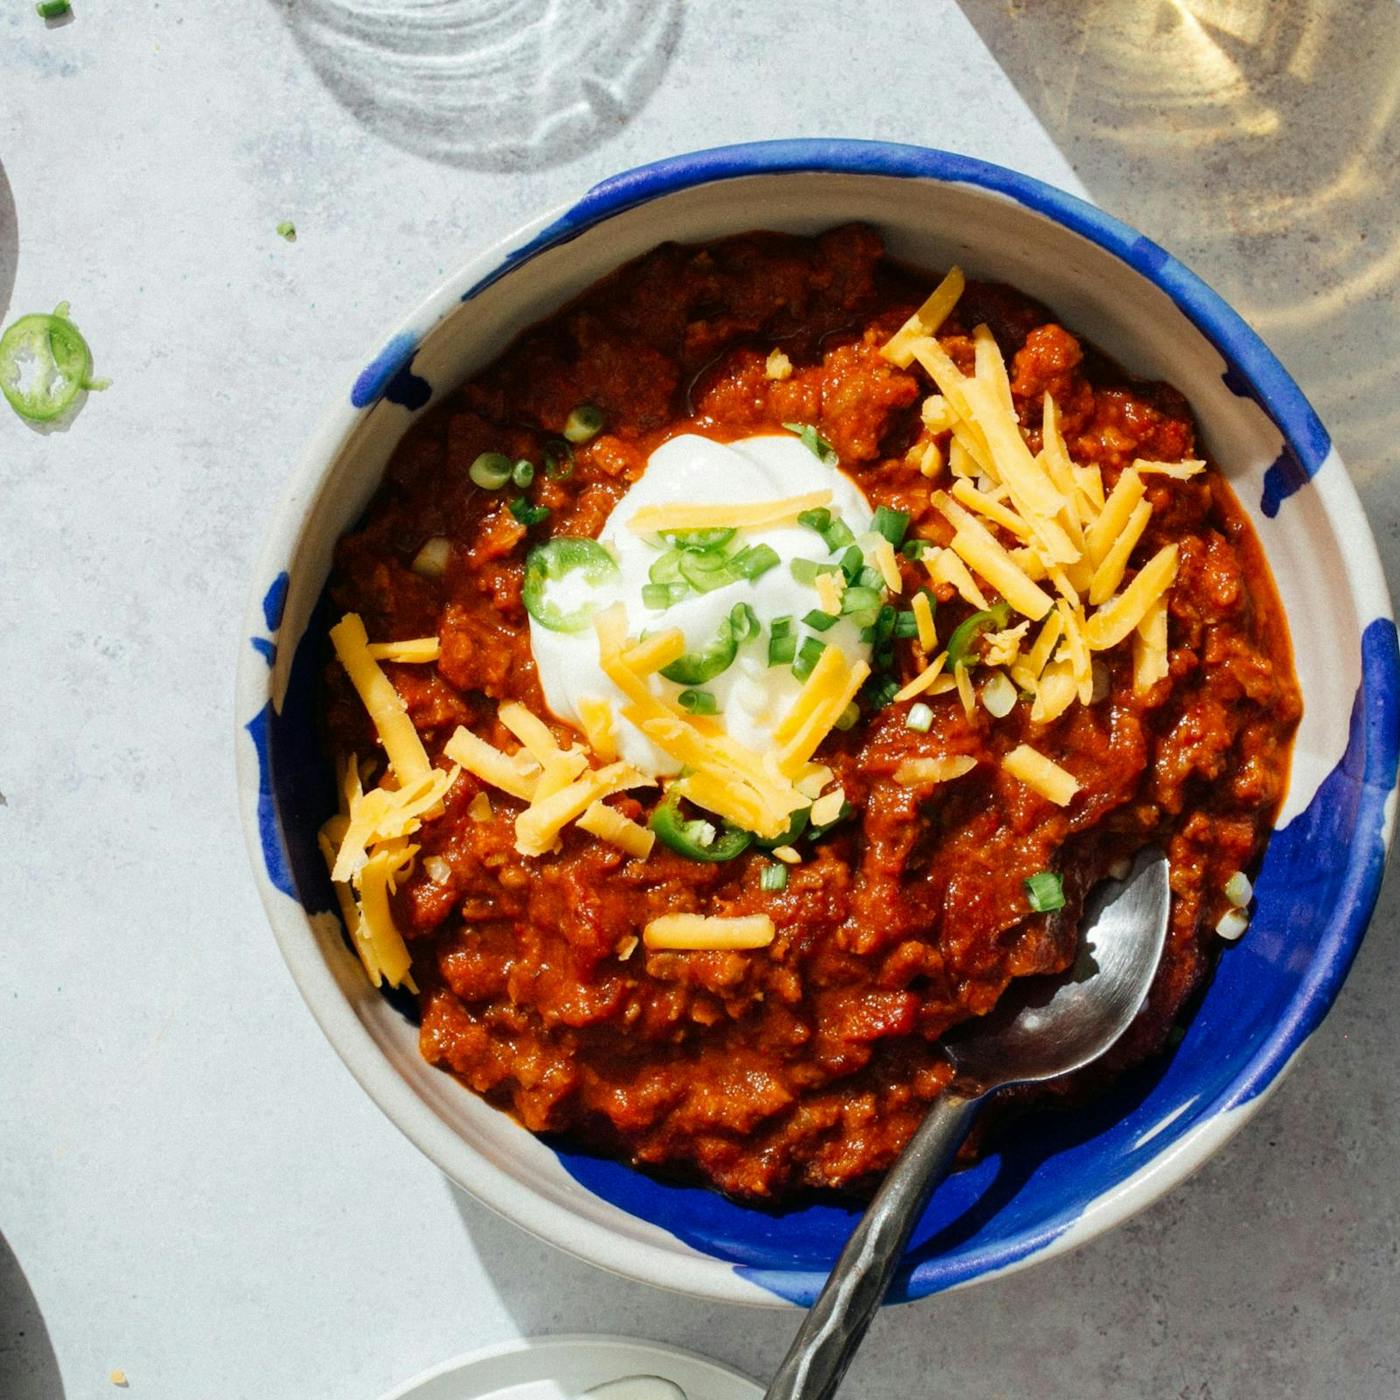 This Plant Based Chili Has No Meat Or Beans Texas Monthly